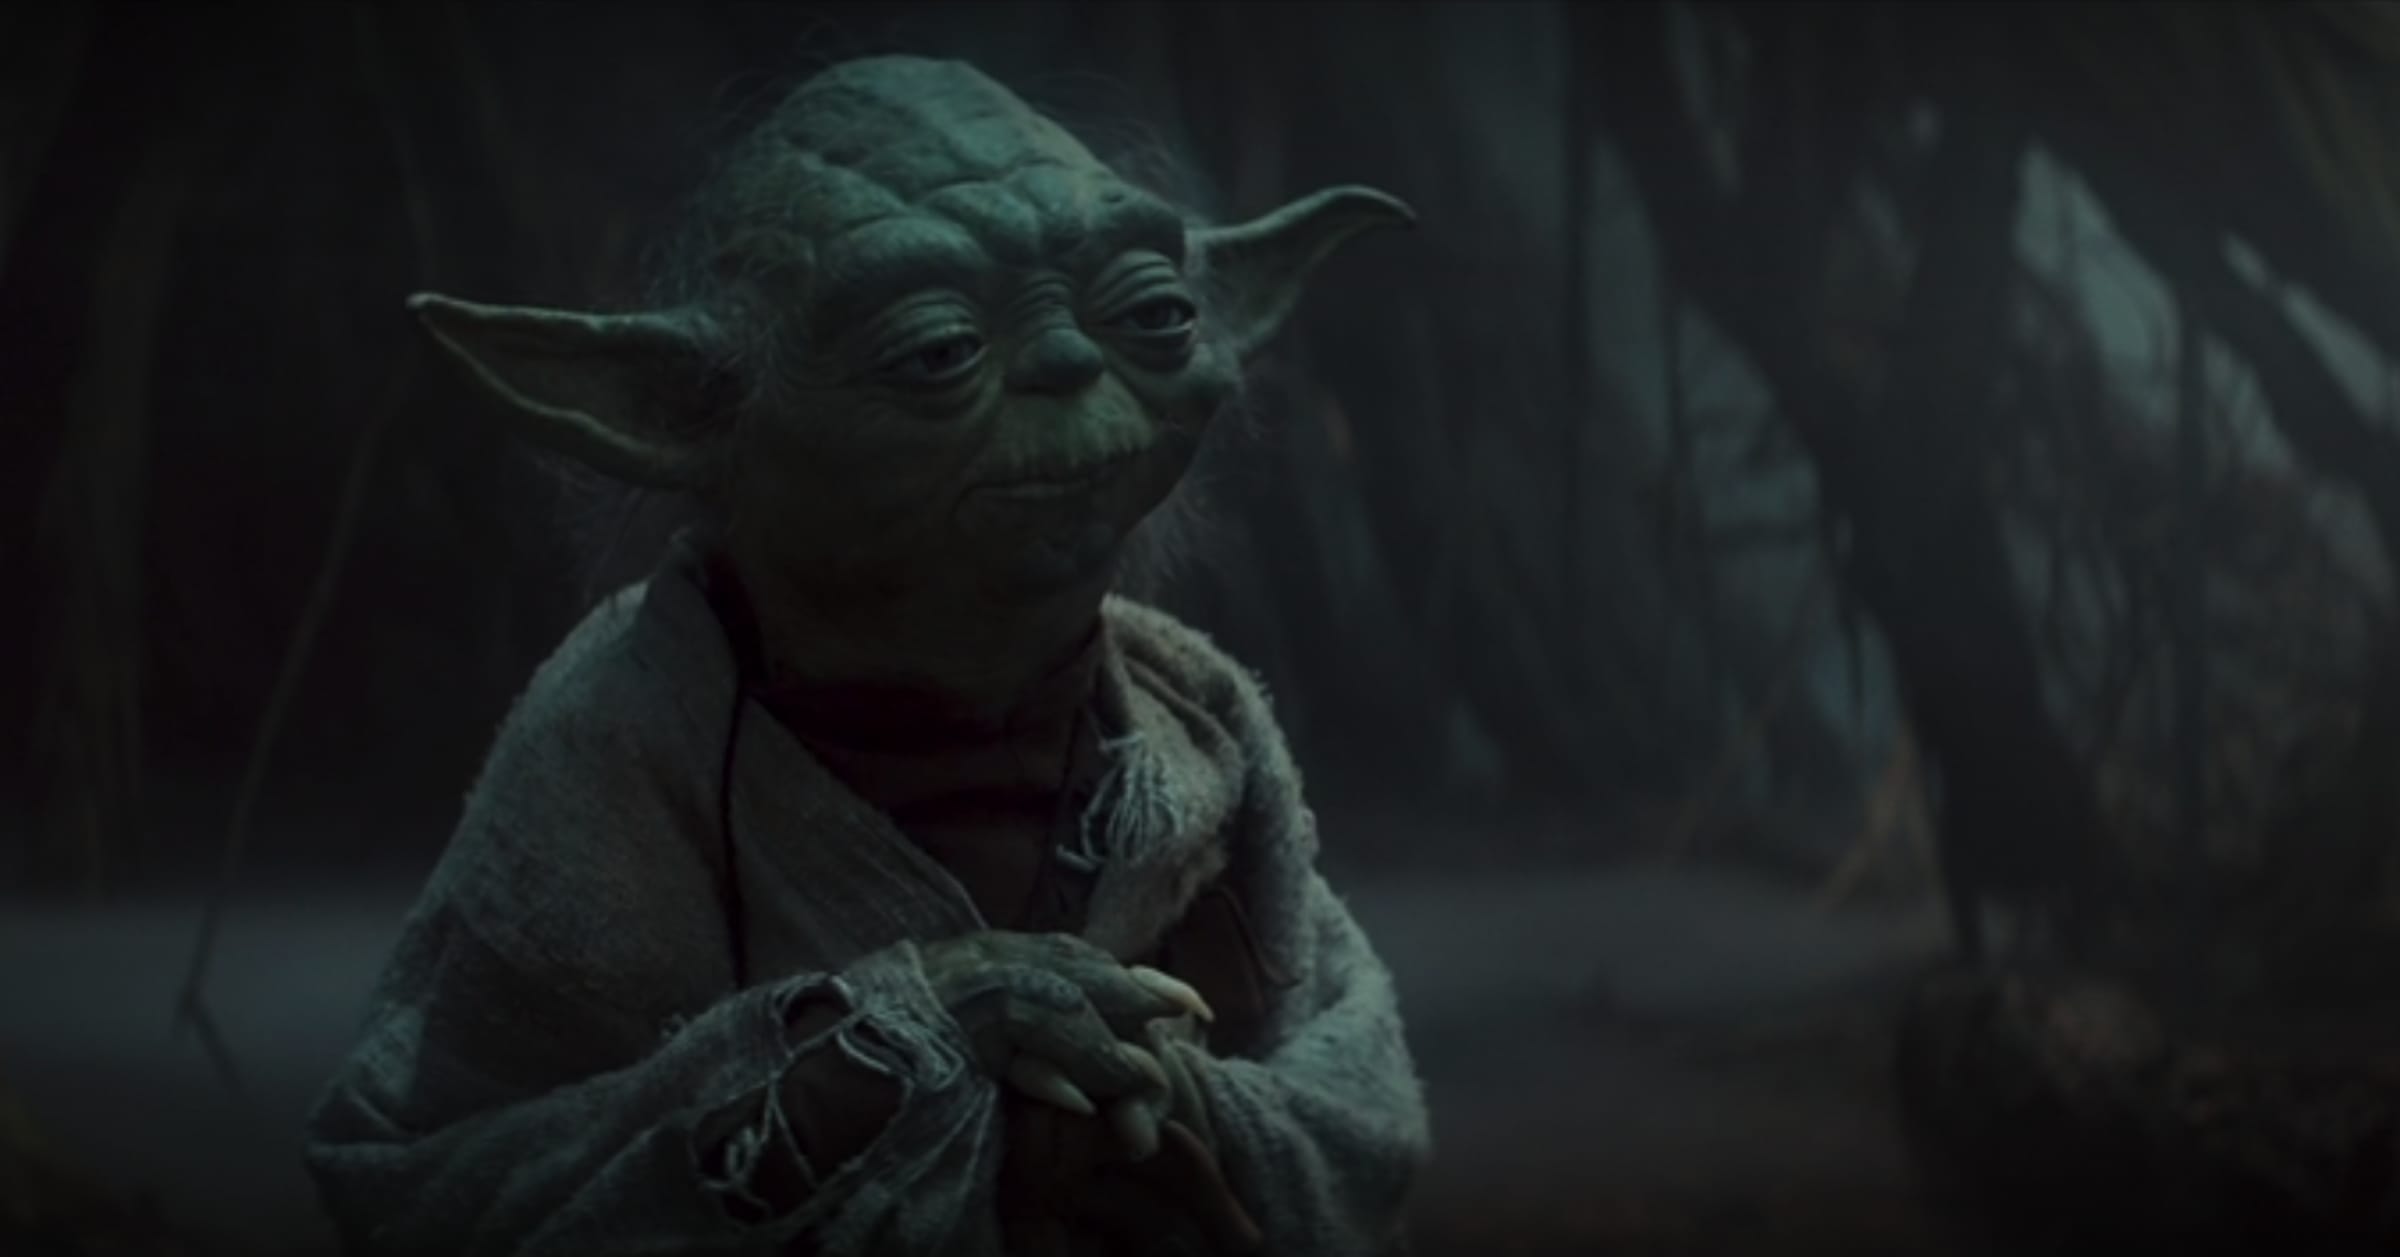 Dark Side Yoda? The Jedi Nearly Became the Most Powerful Sith